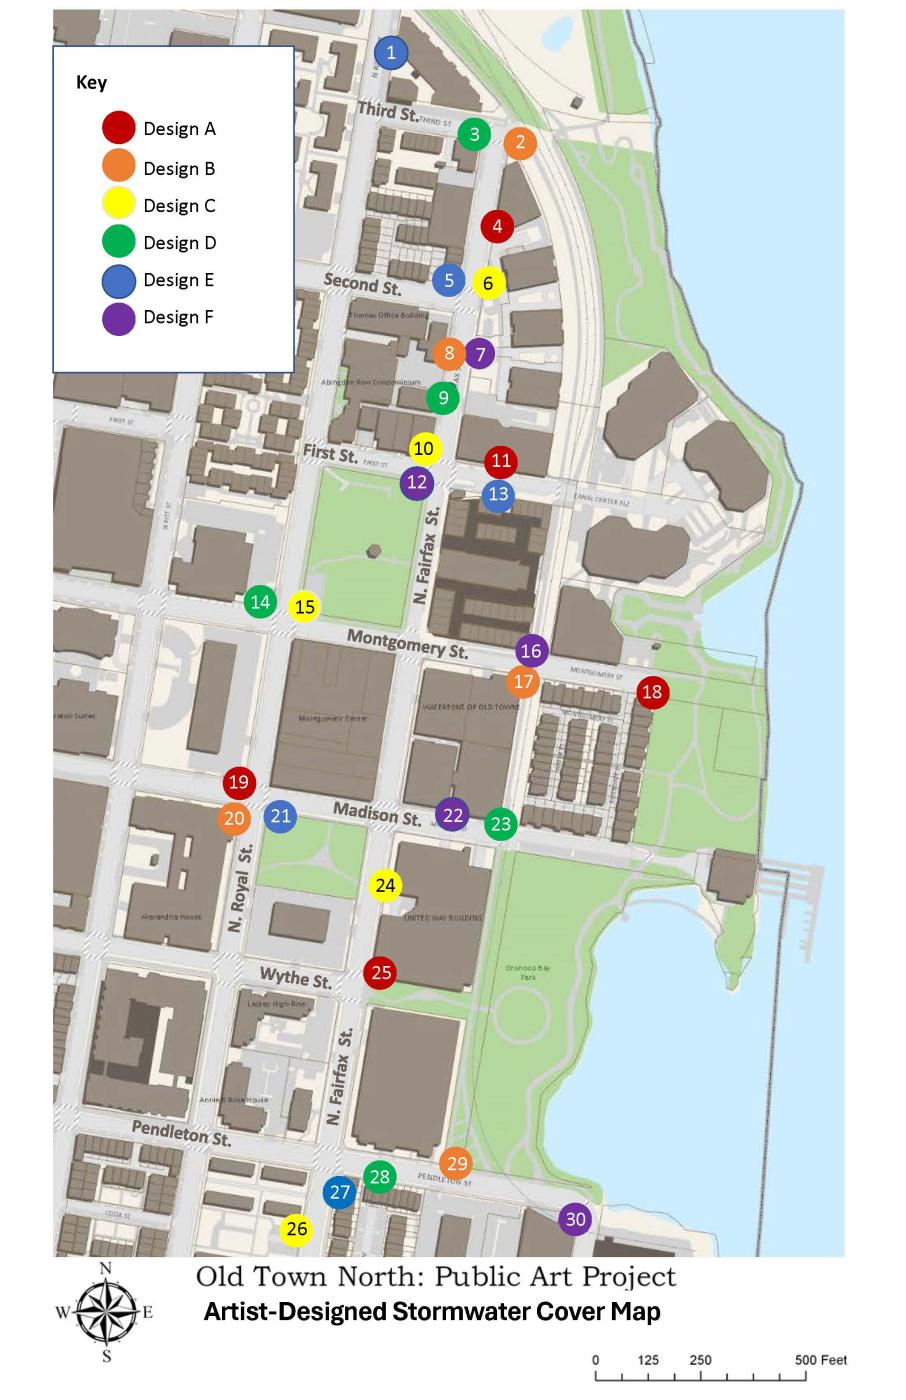 Map of installed locations of stormwater covers in Old Town North